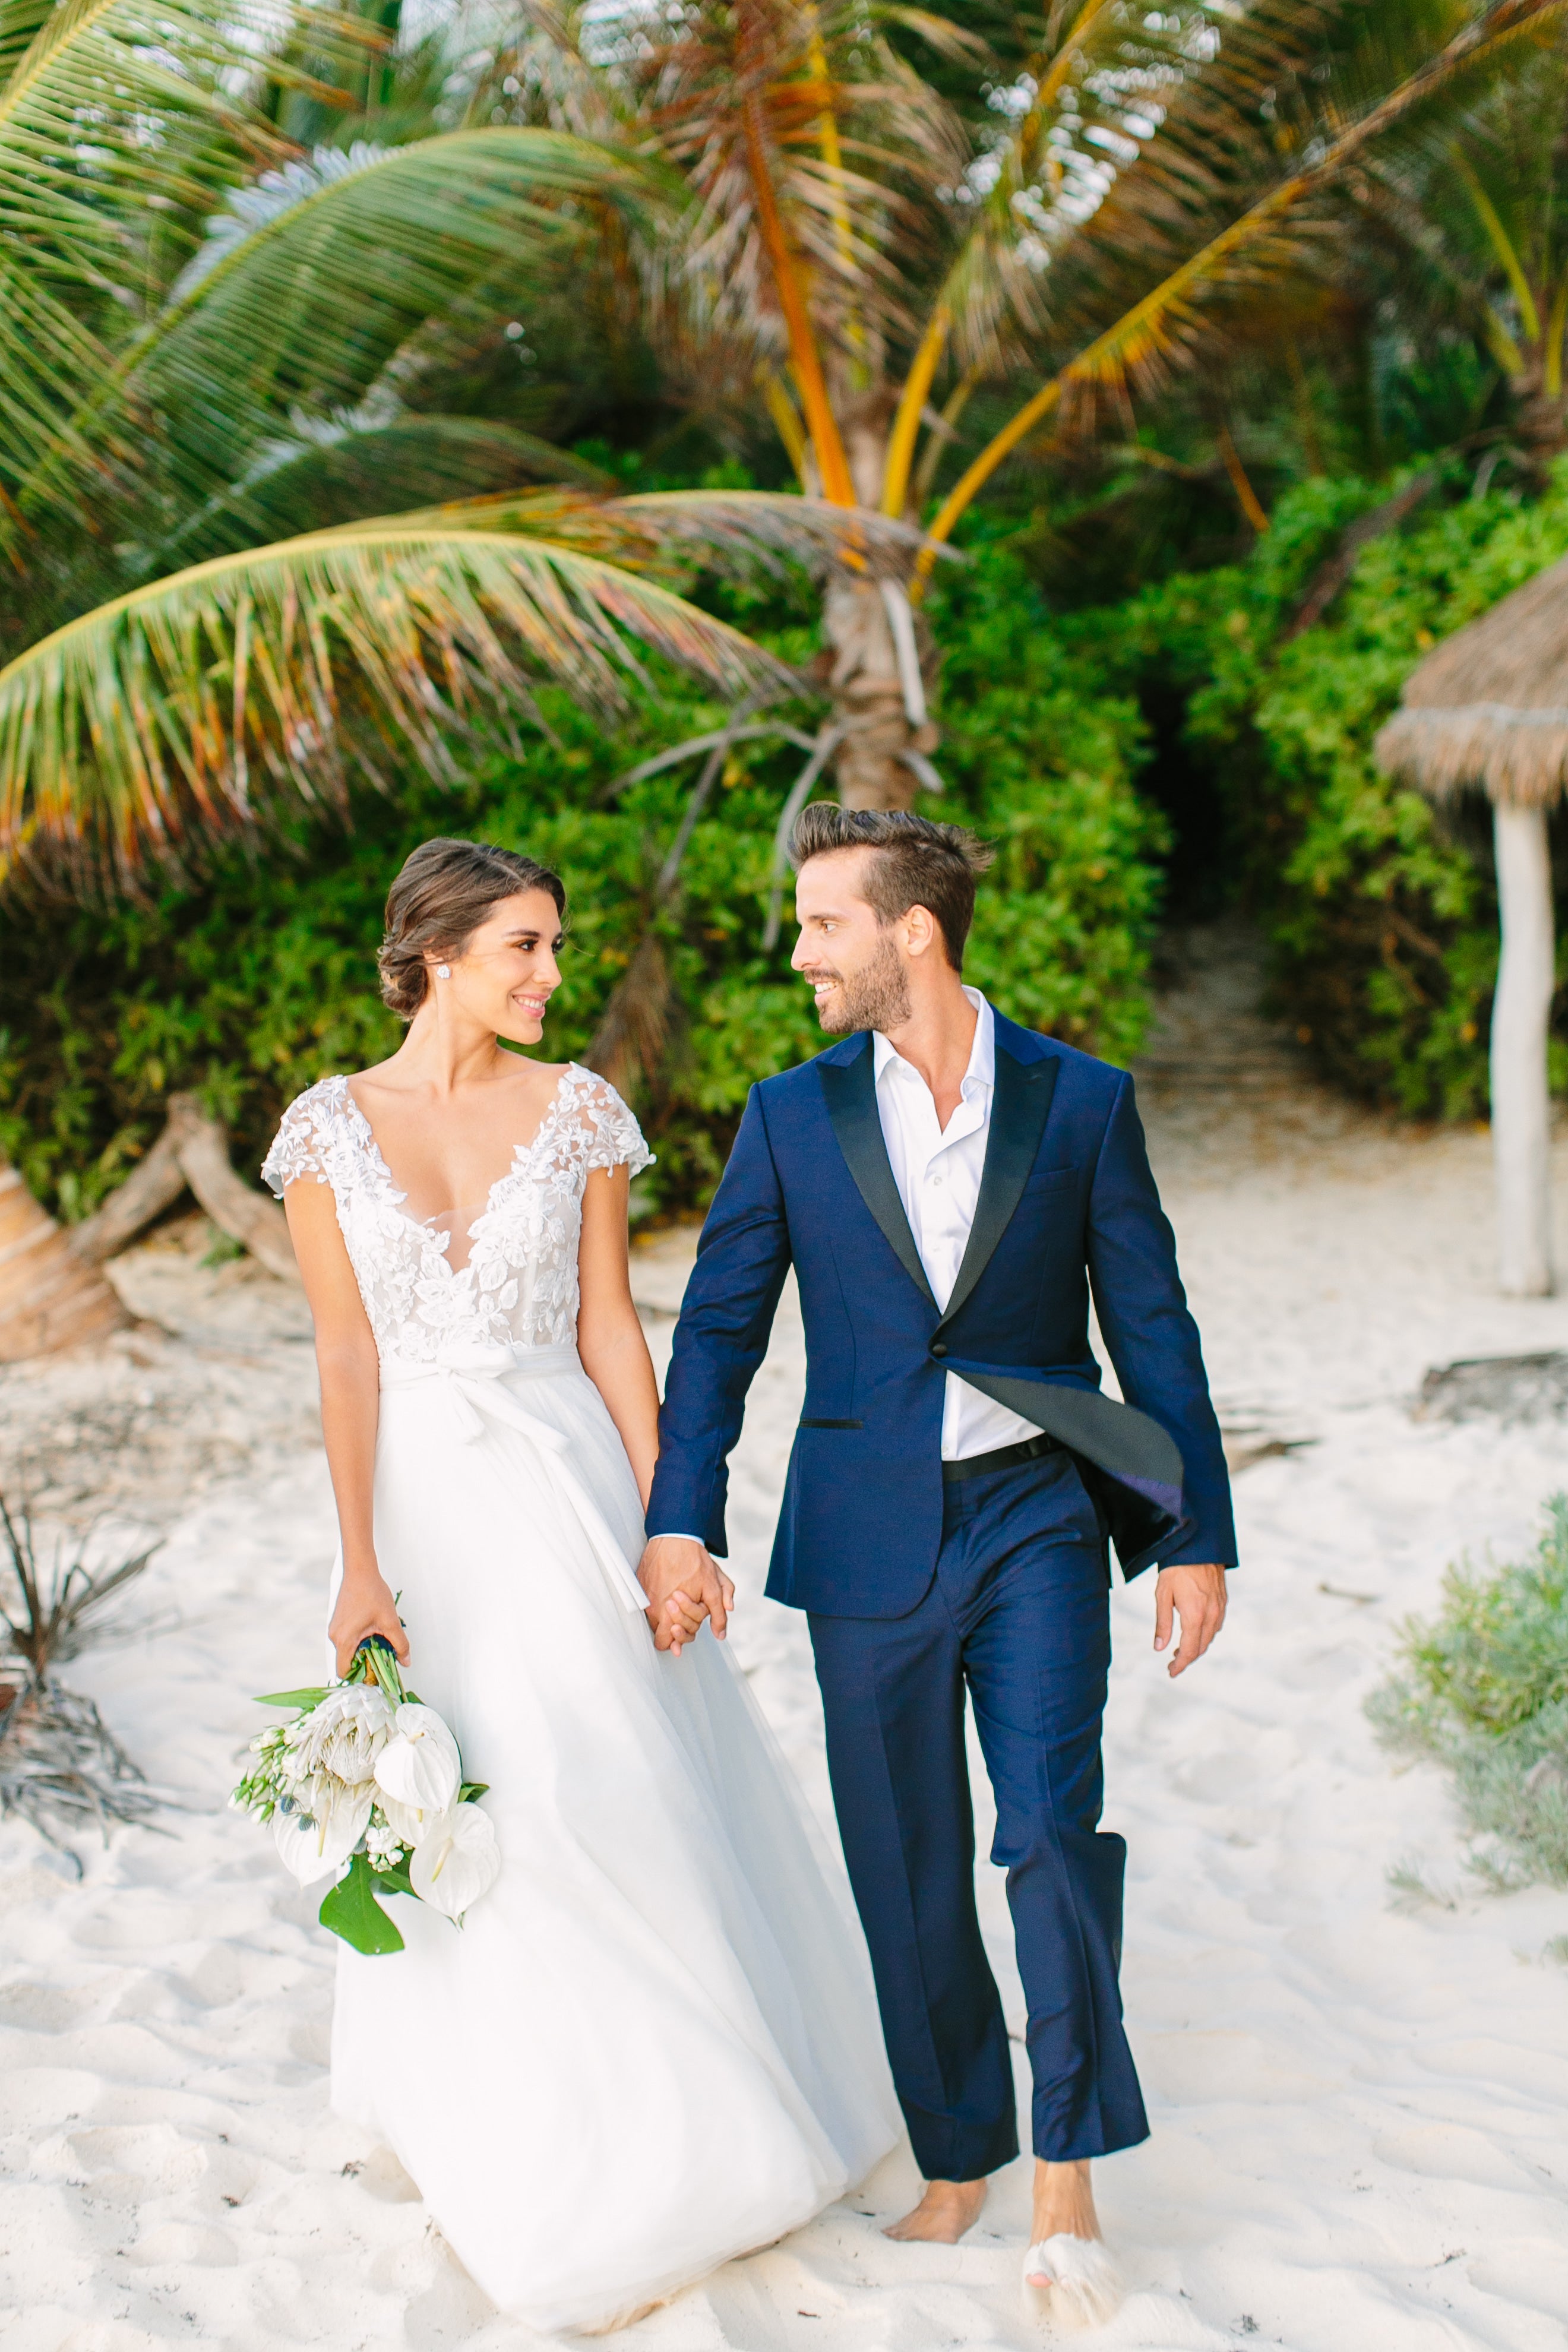 Tulum Weddings Are Unbelievably Romantic—Here's Proof: We took Kleinfeld Bridal wedding dresses and Kleinfeld Bridal Party bridesmaids dresses to Tulum, Mexico for a fun photoshoot on the beach full of flowers, sun, sand and fun!